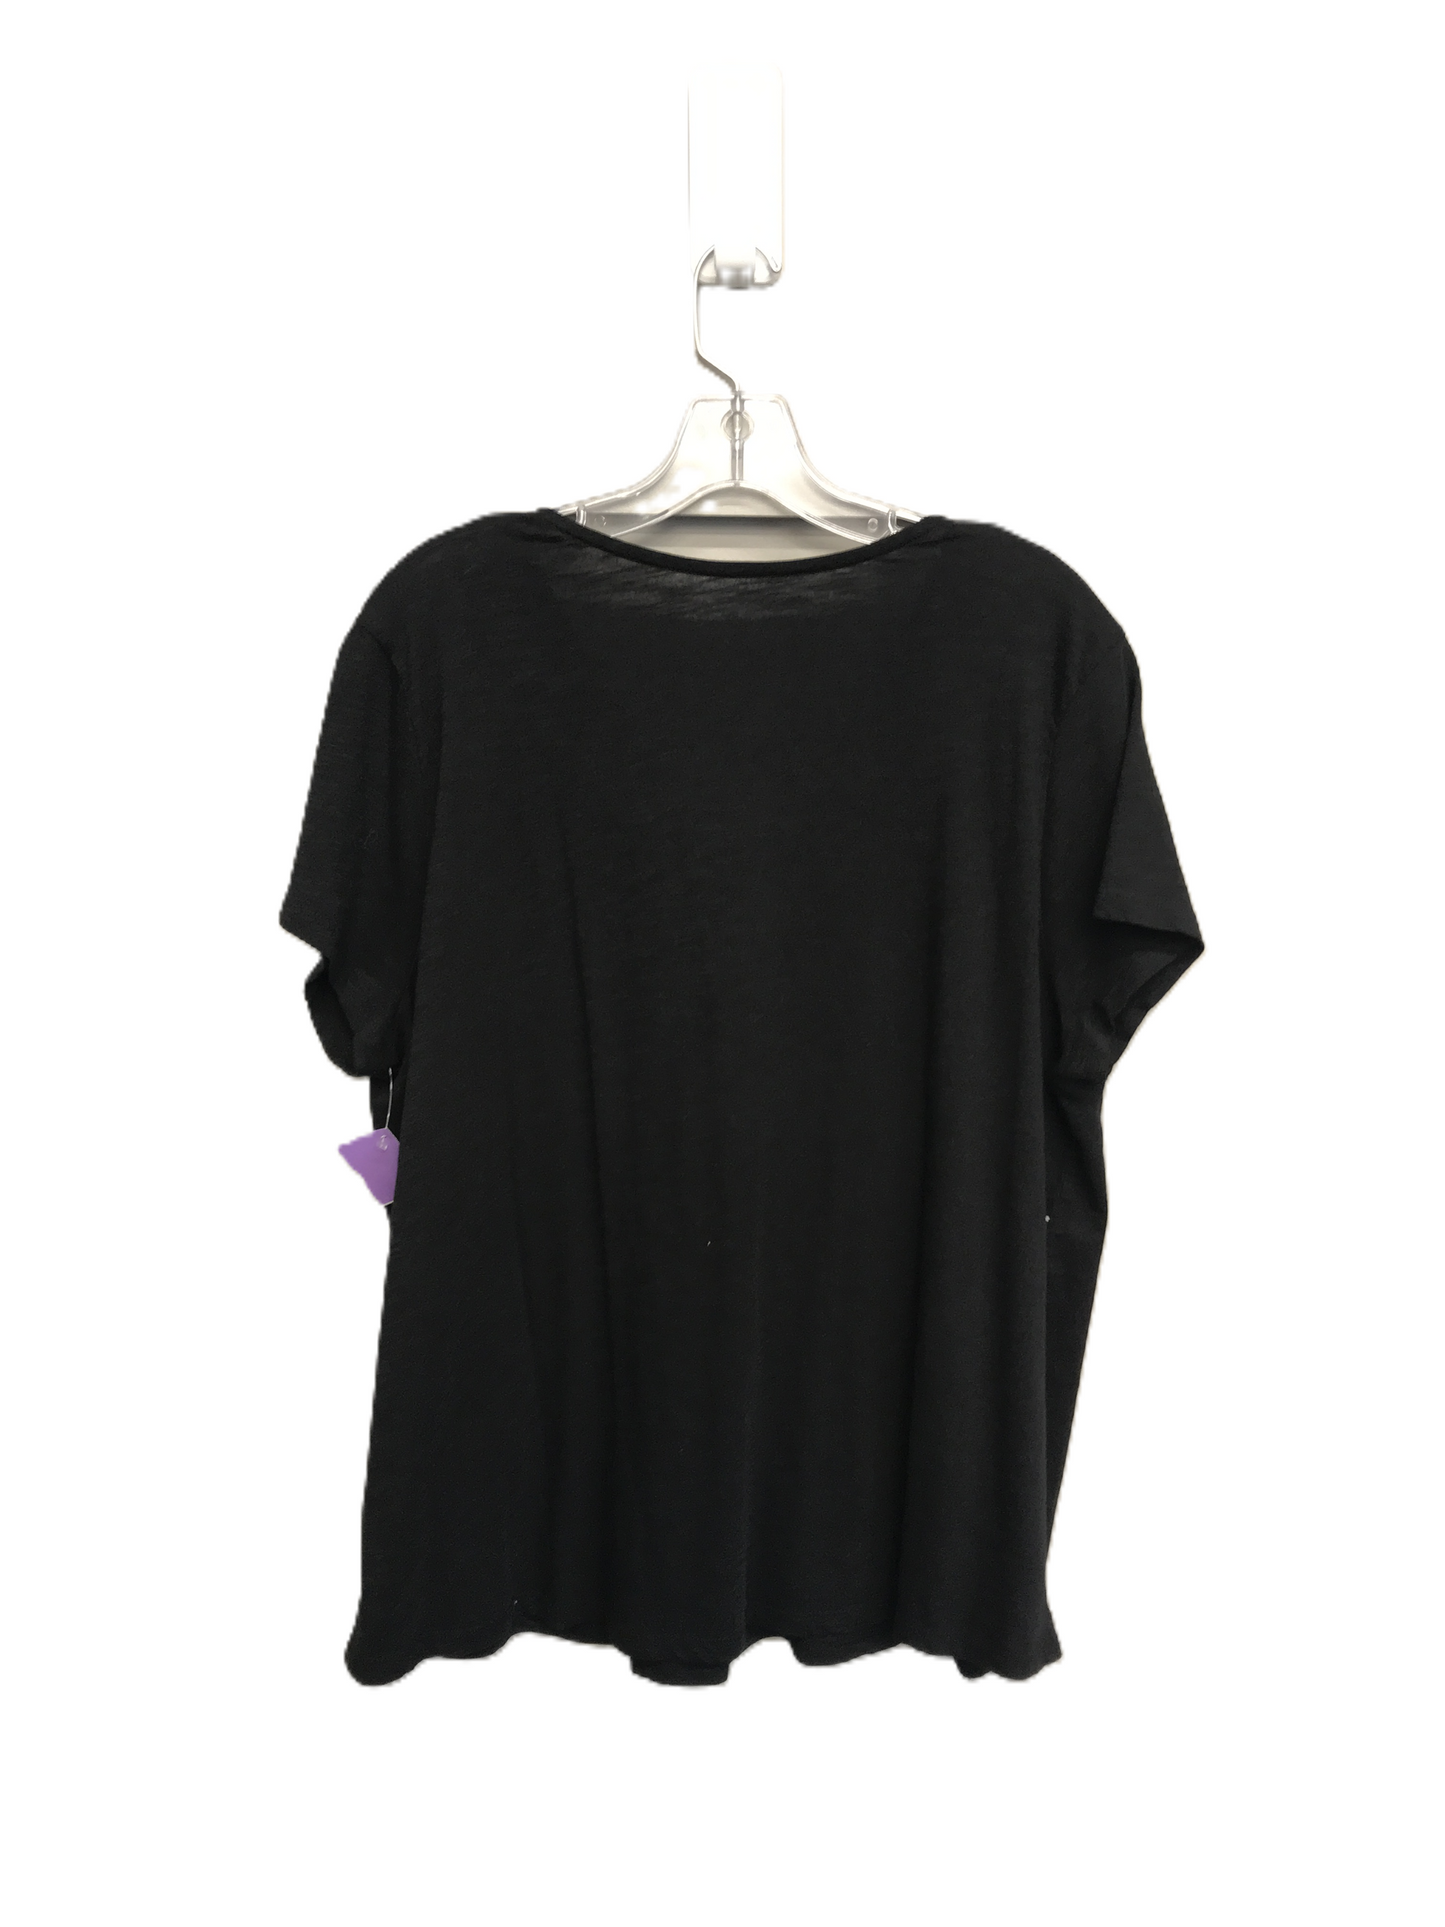 Black Top Short Sleeve Basic By Soft Surroundings, Size: 1x